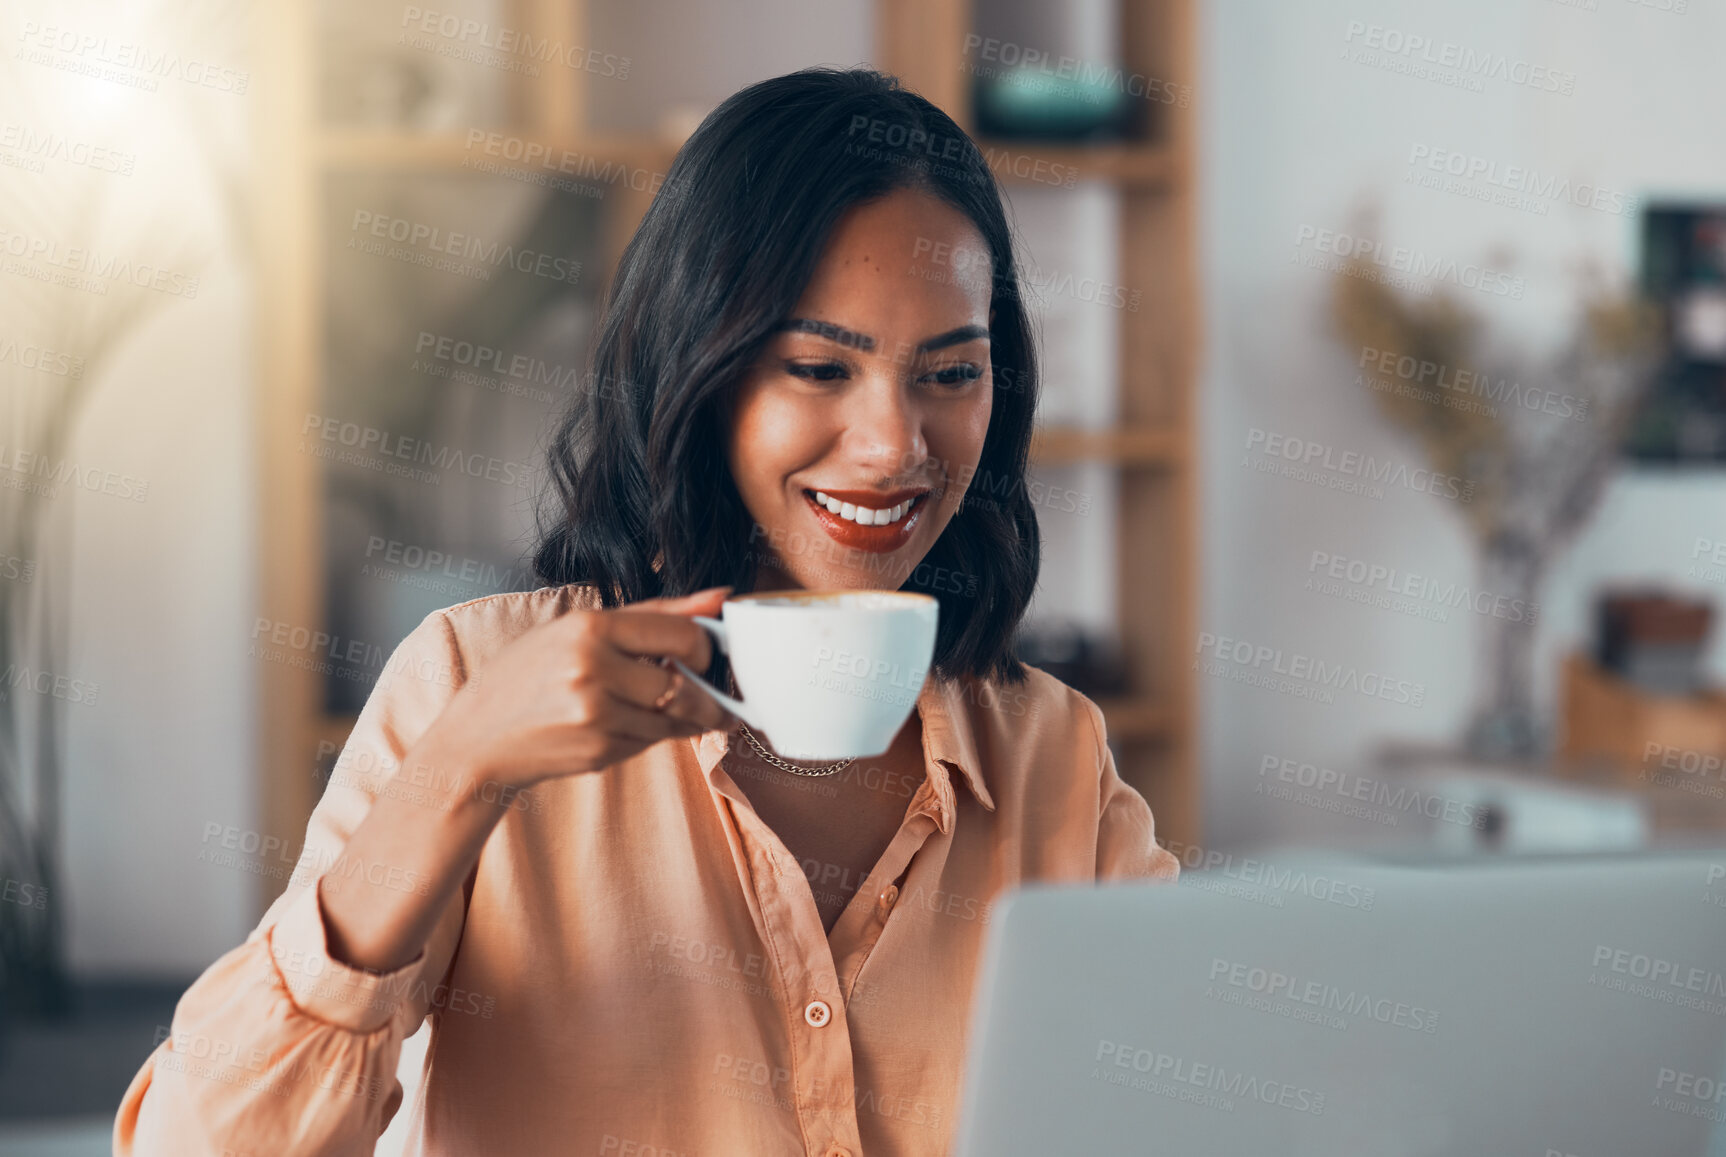 Buy stock photo Coffee, reading female freelancer, work from home or remote worker on laptop replying to copywriting emails. Trendy, young and smiling woman on social media or browsing internet for online news